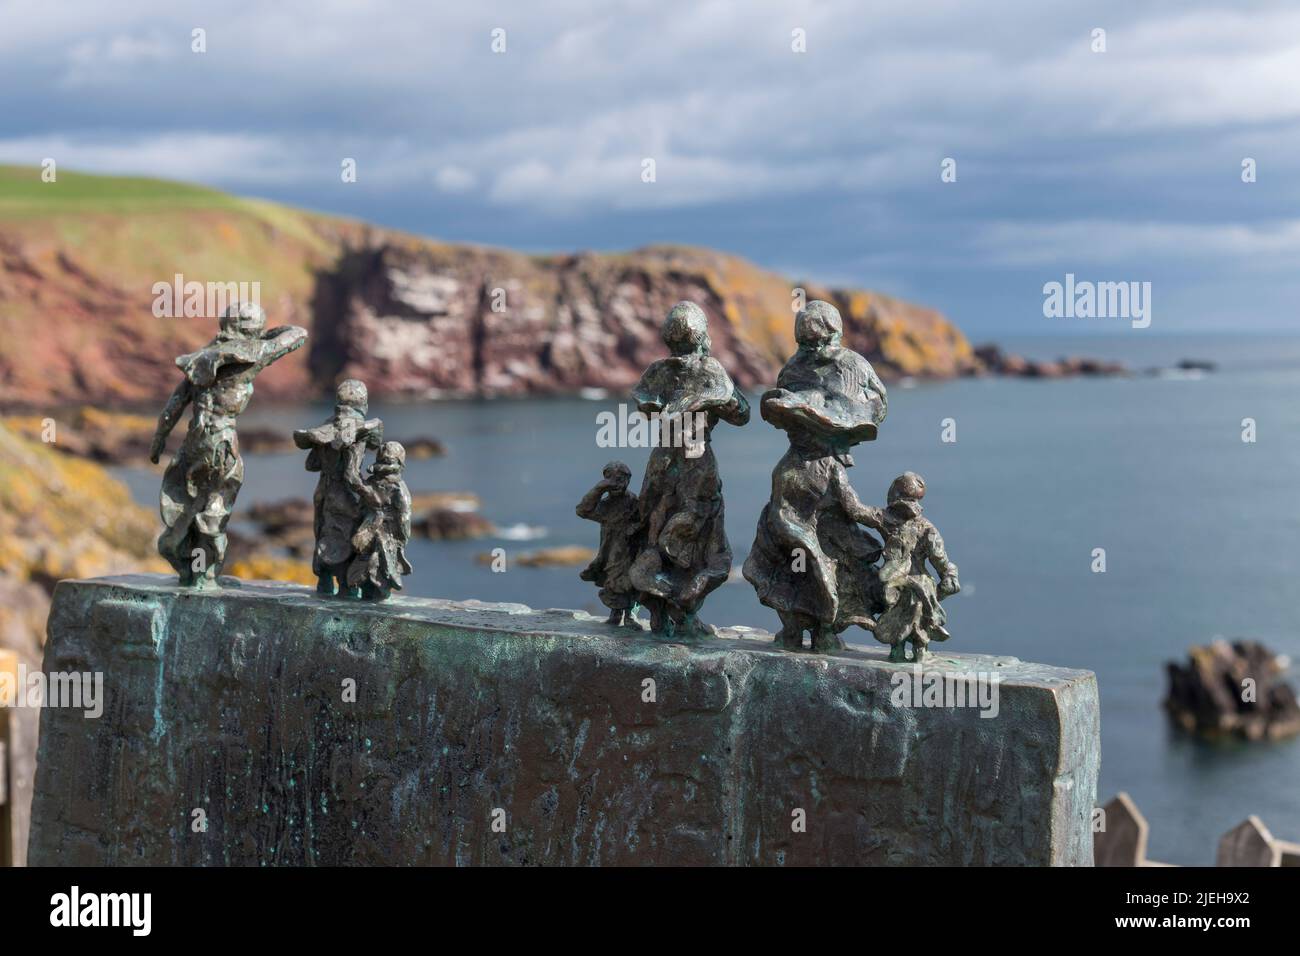 Widows & Bairns memorial to the fishermen lost and widows & bairns left behind in St Abbs in a storm 14th Oct 1881, St Abbs, Berwickshire, Scotland Stock Photo